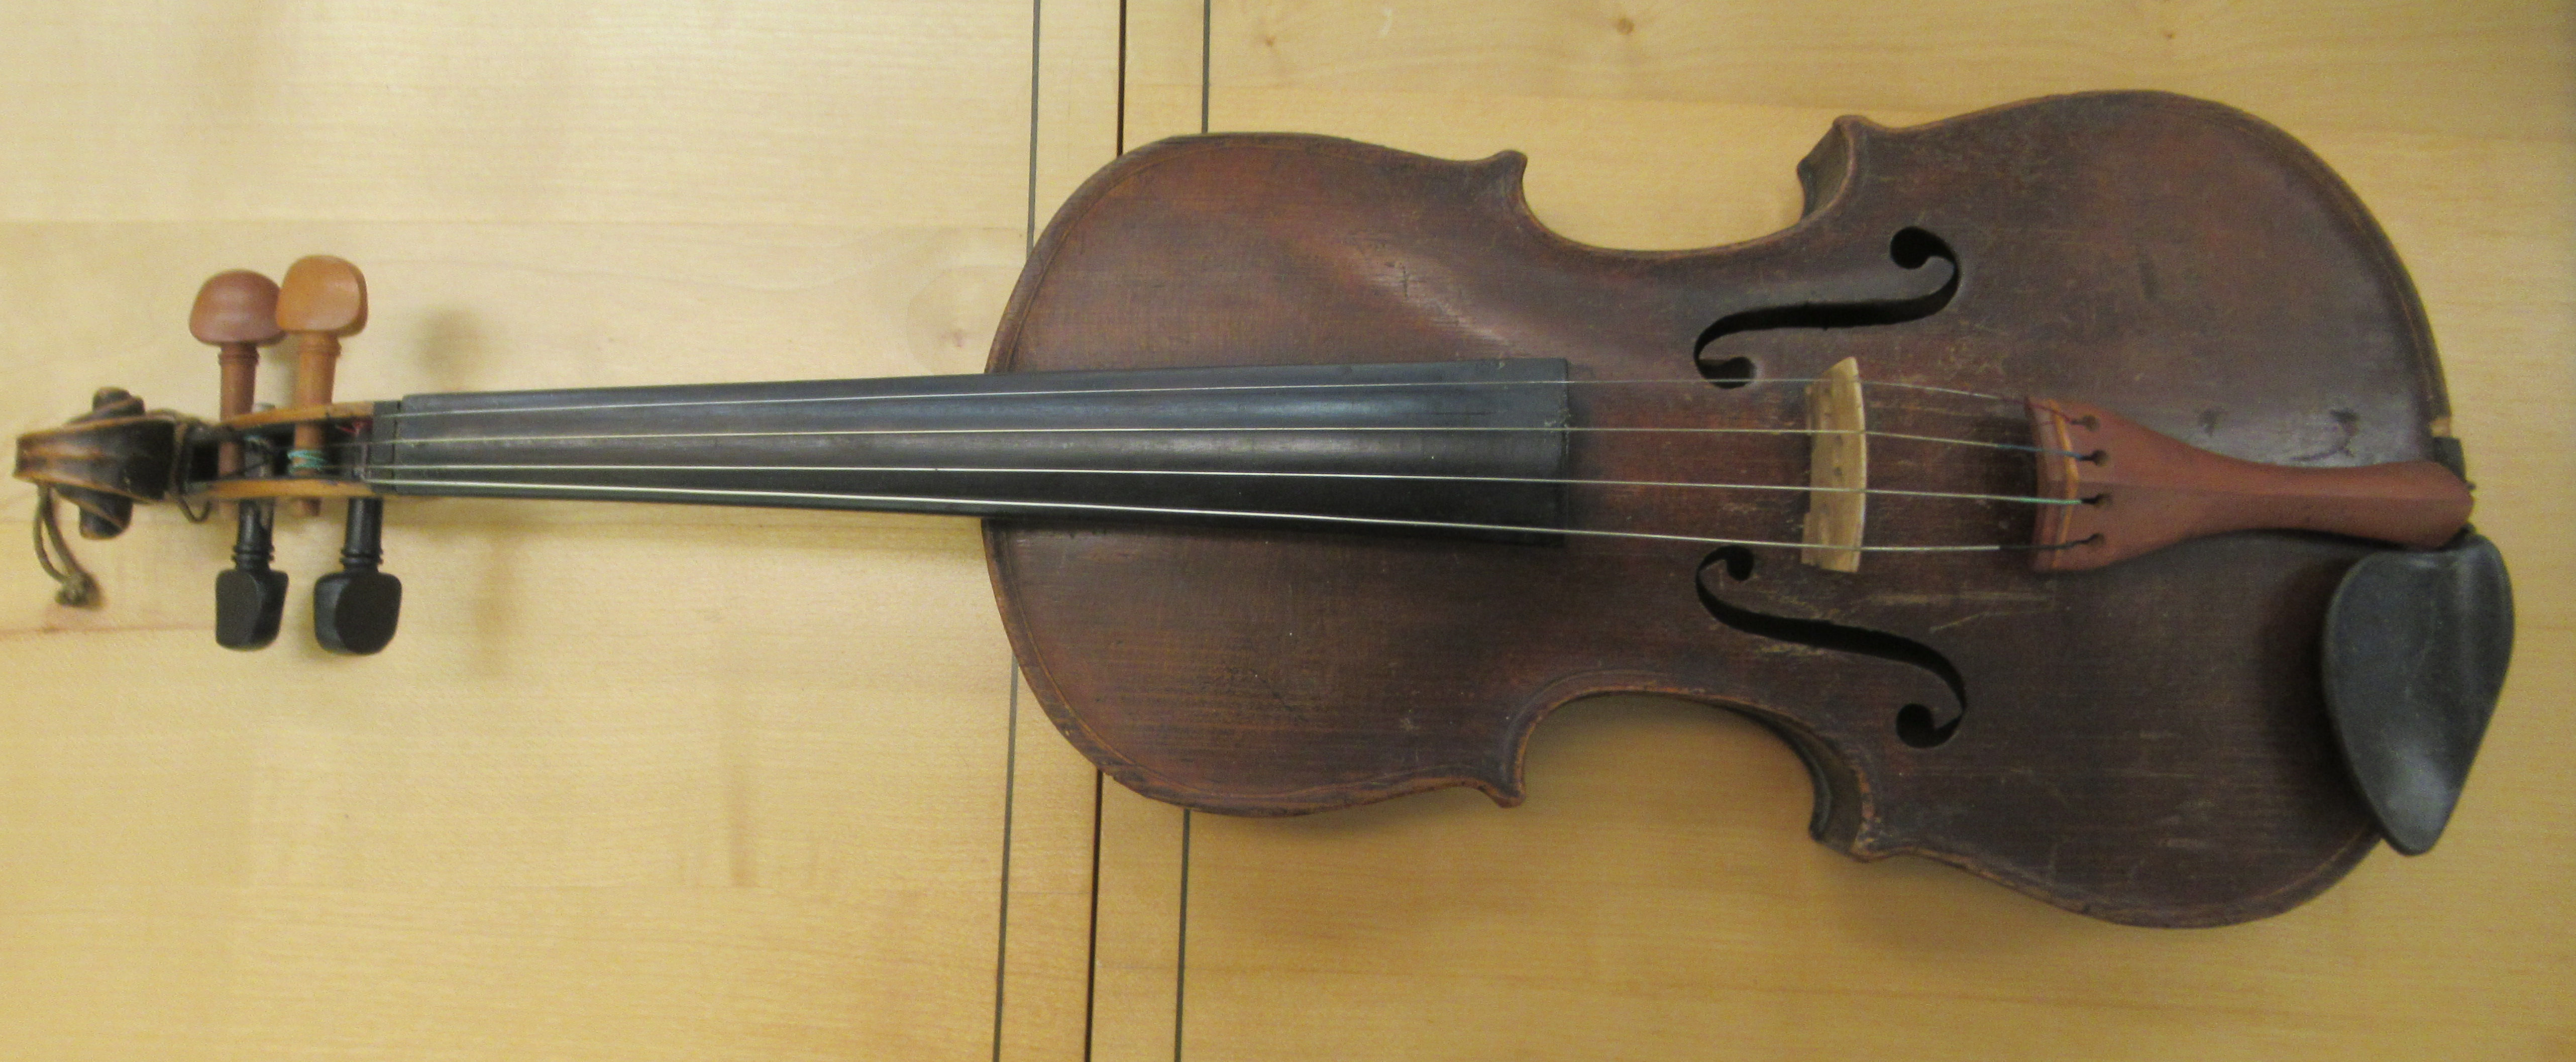 Three 19th/20thC violins, one with a one piece back  14"L; the others with two piece backs  13" - Image 7 of 16